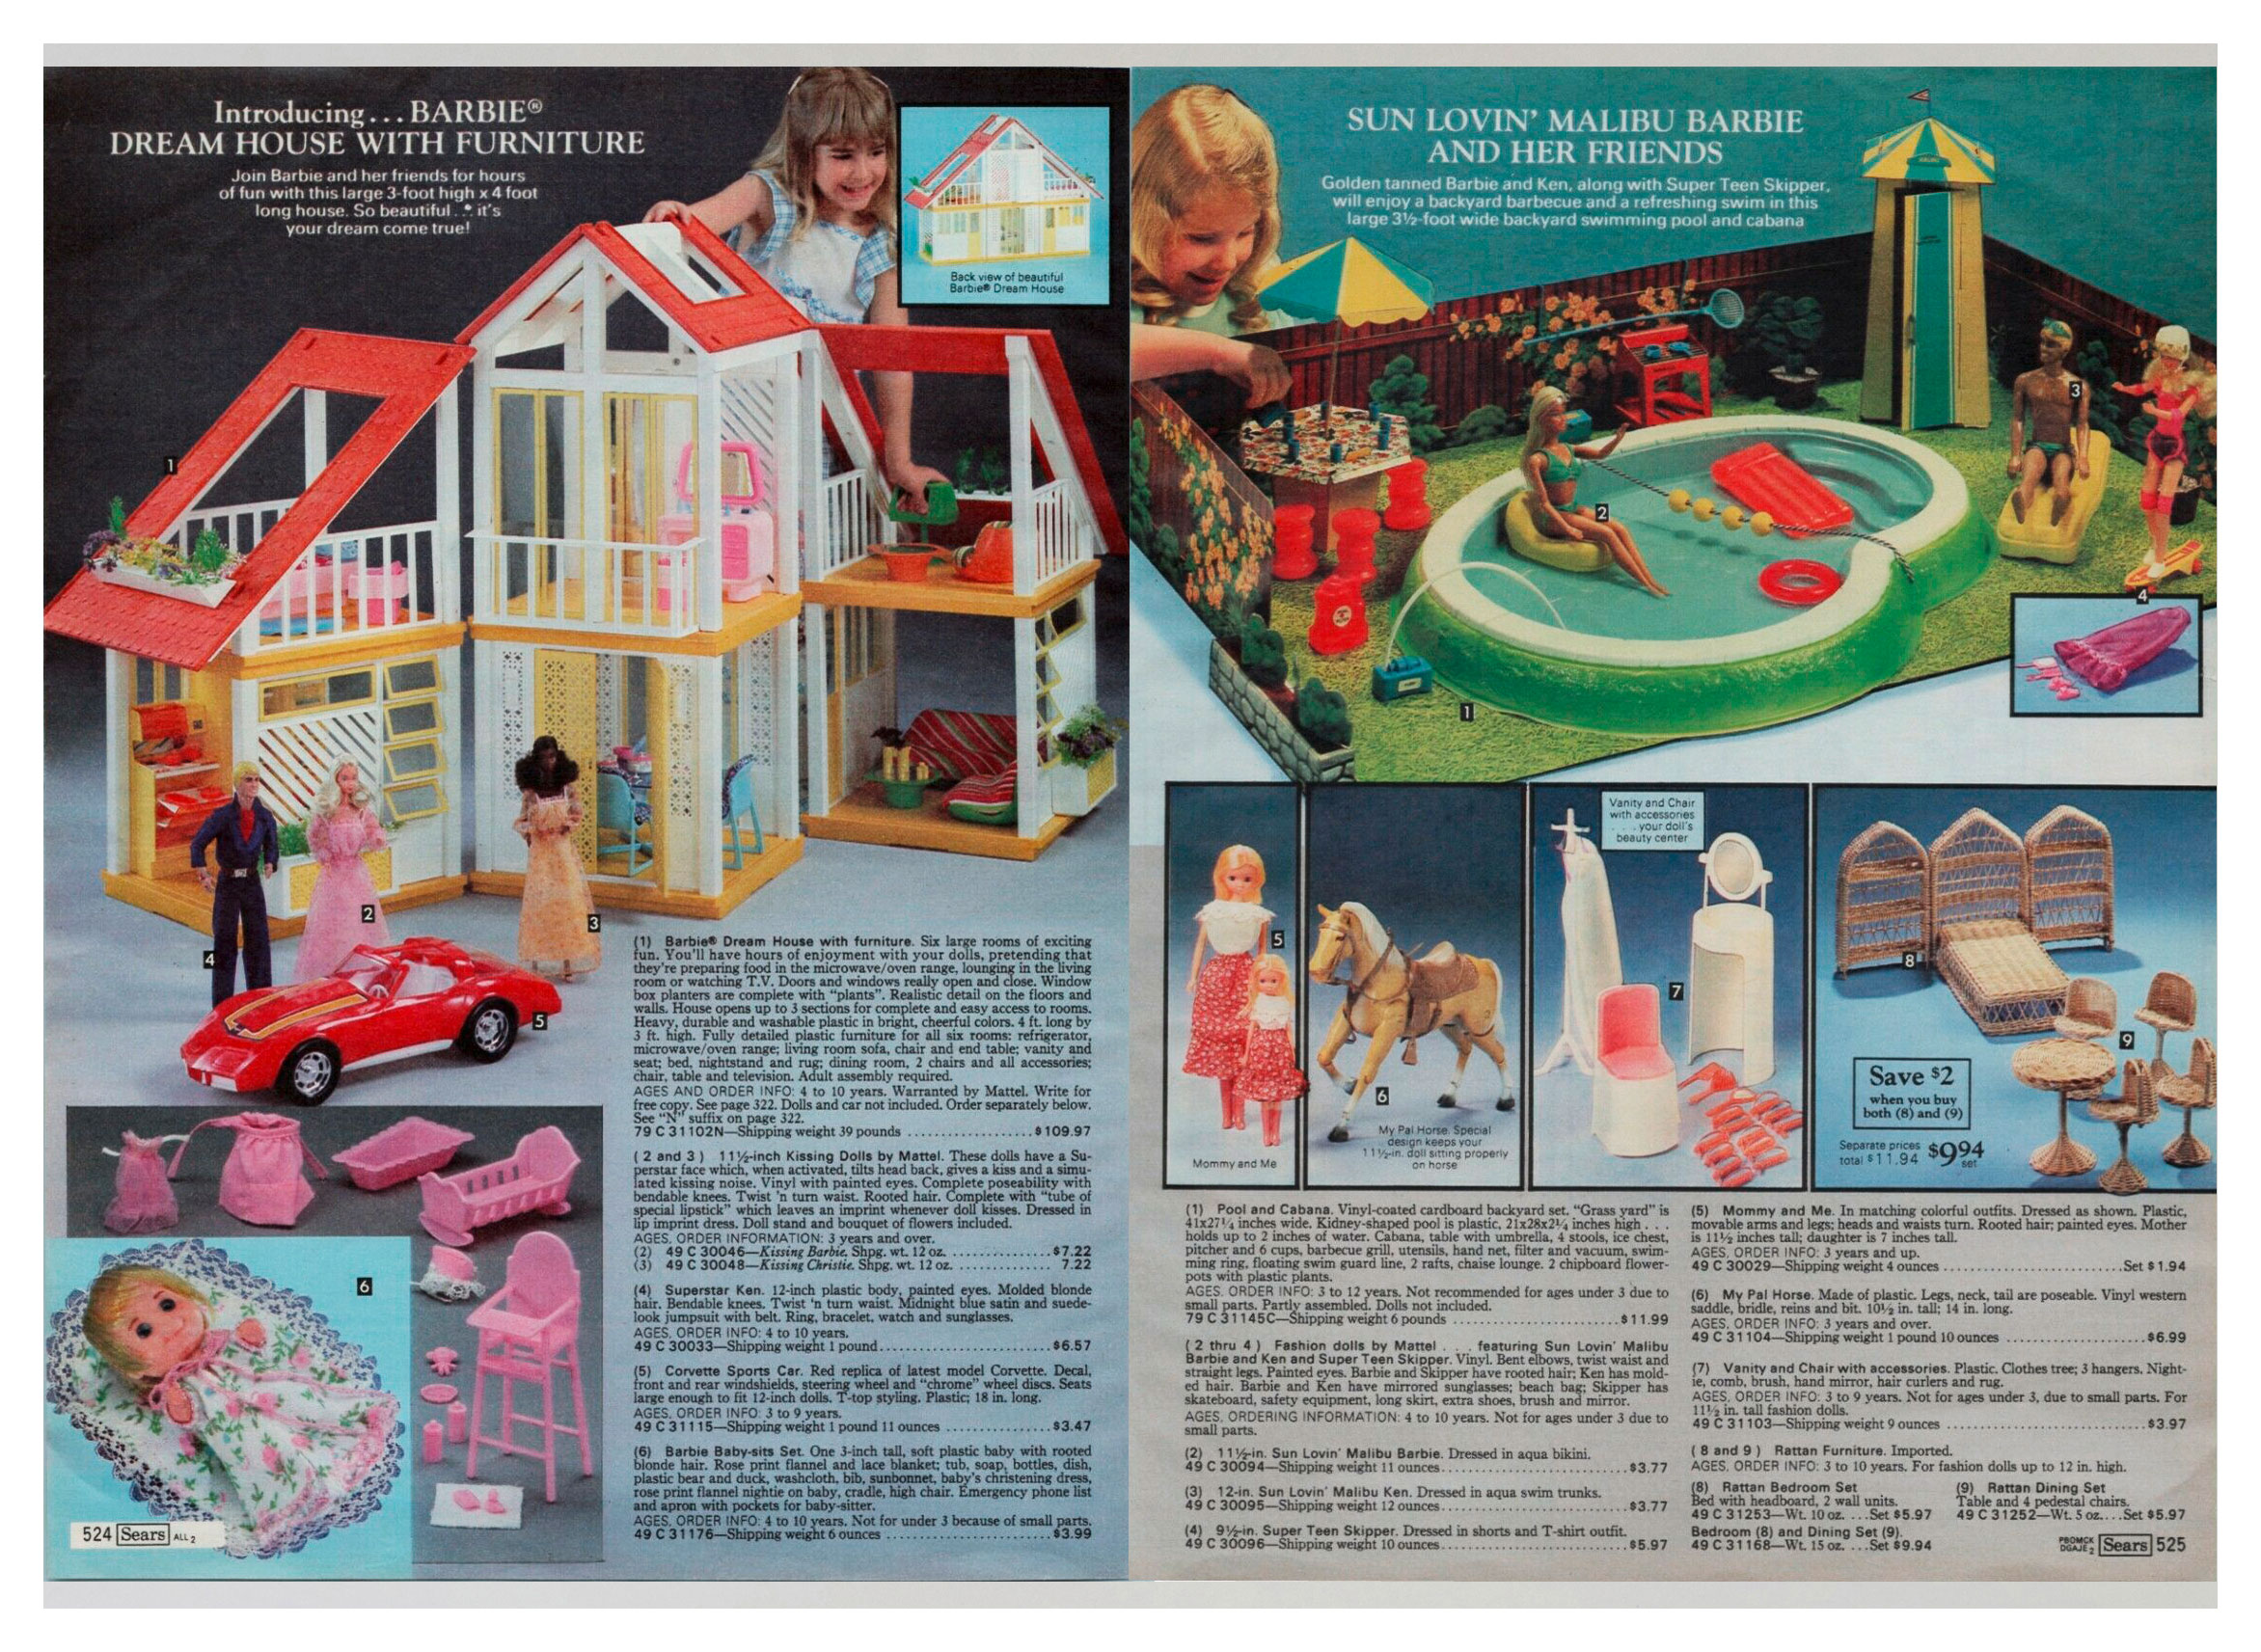 From 1979 Sears Wish Book